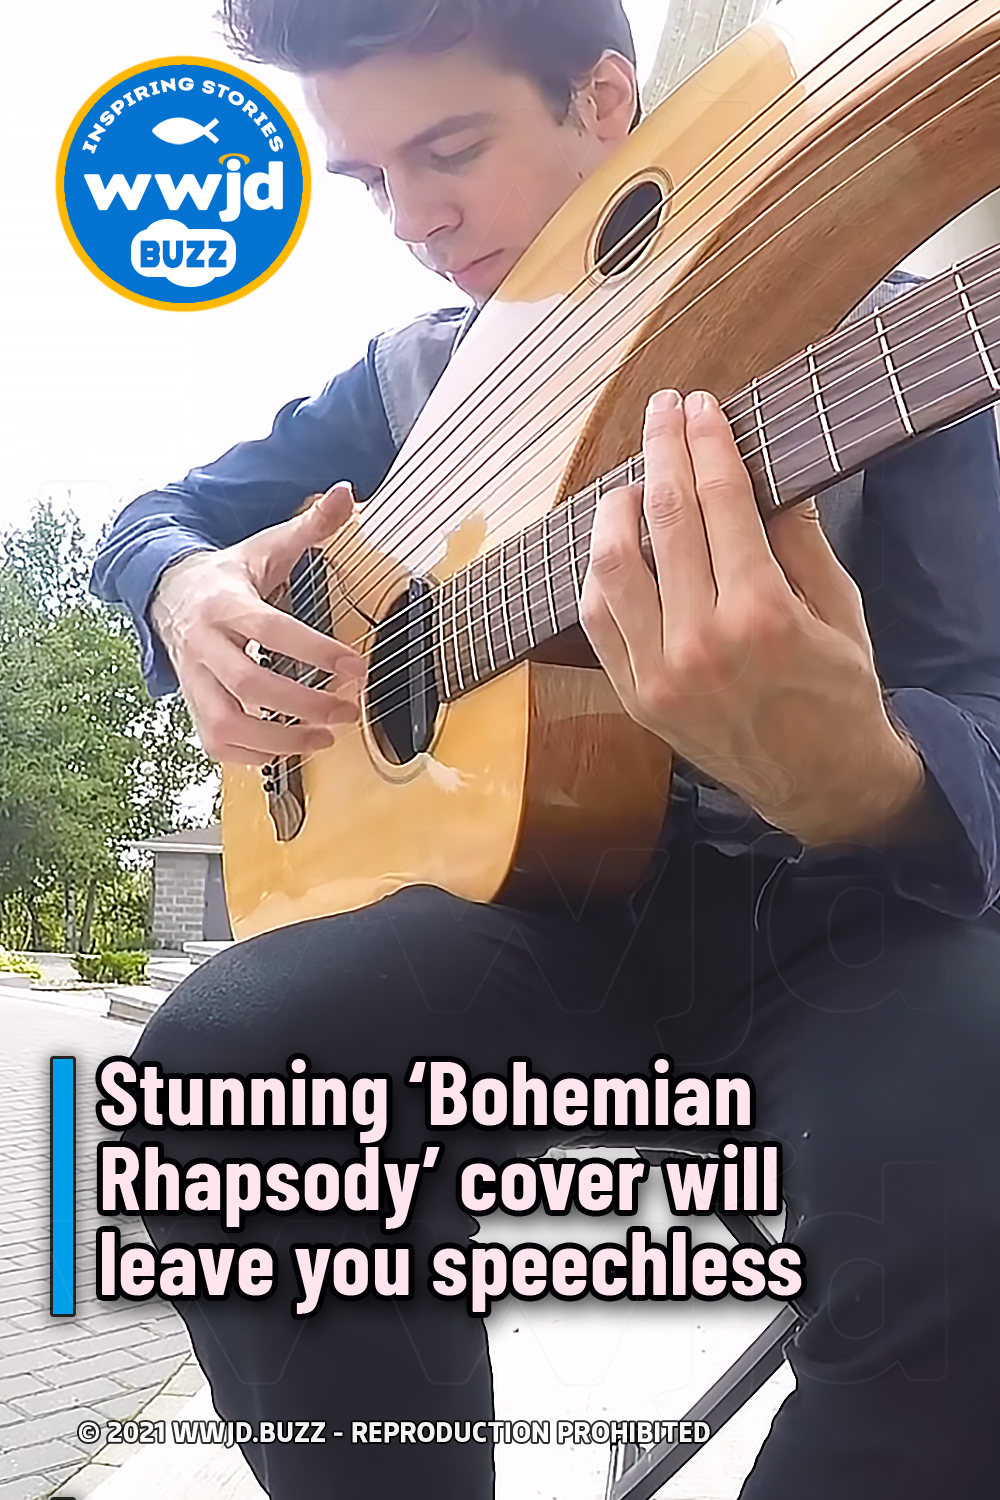 Stunning ‘Bohemian Rhapsody’ cover will leave you speechless